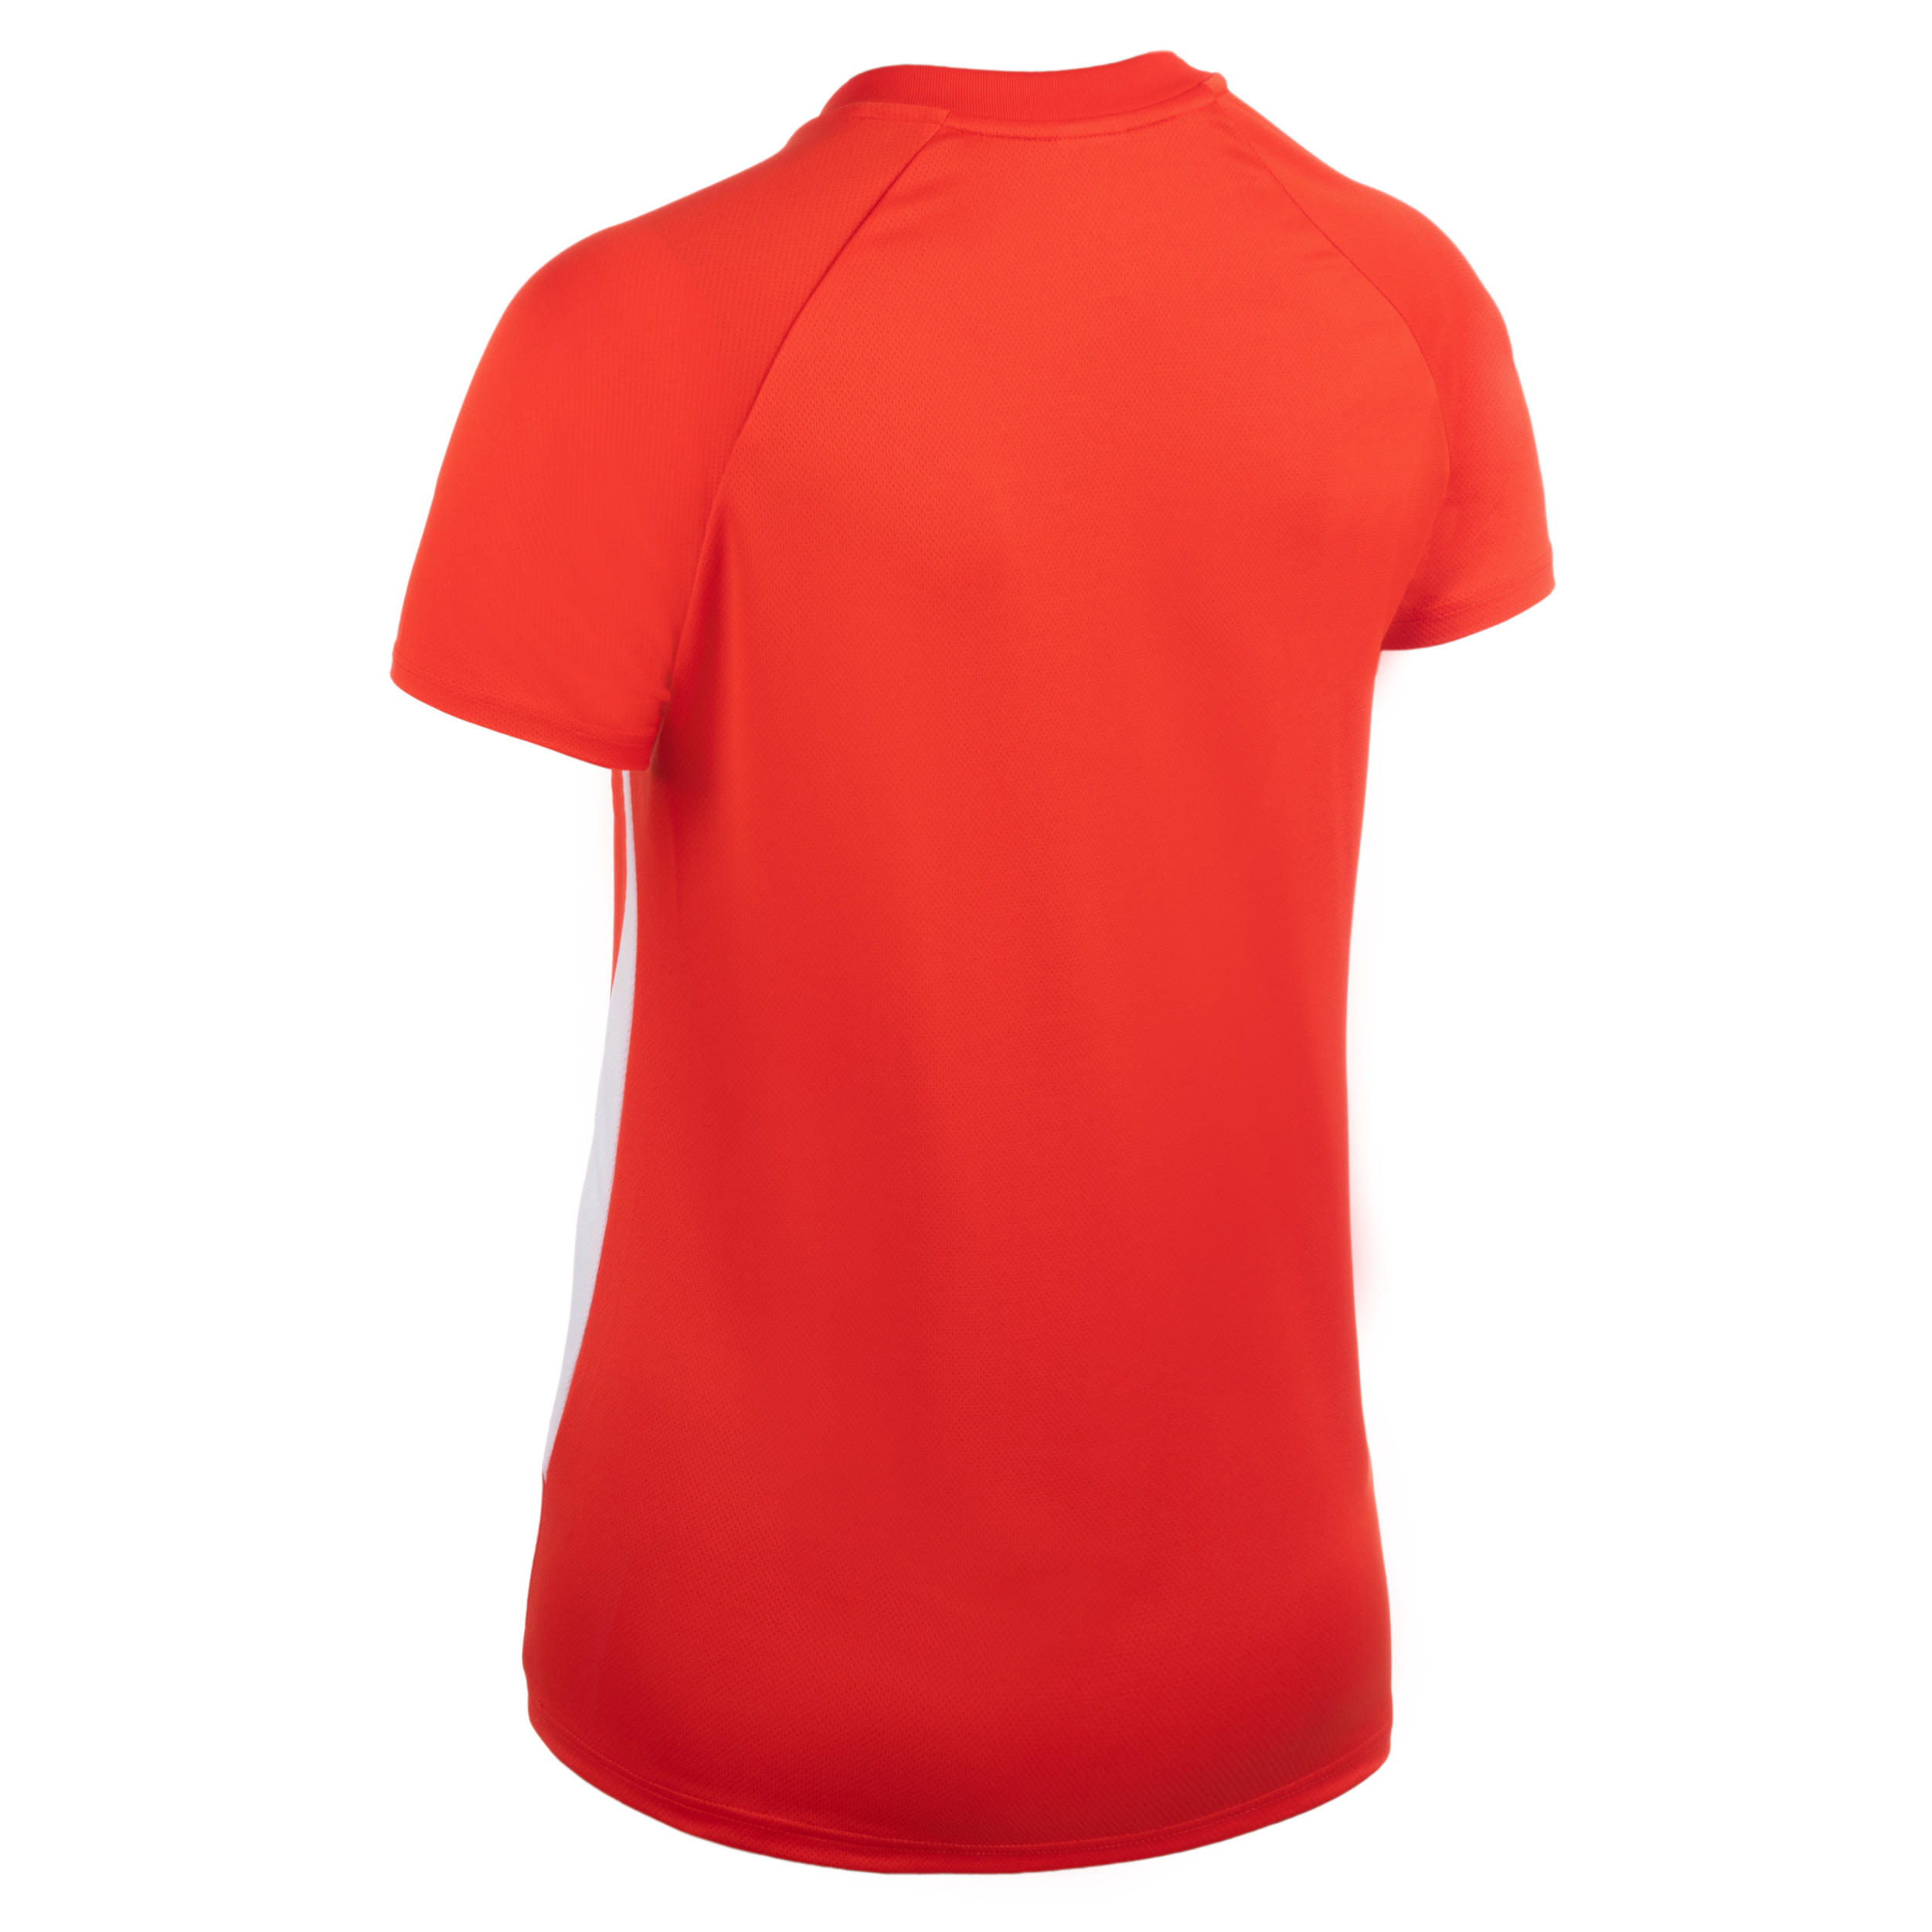 V100 Women's Volleyball Jersey - Red 2/8